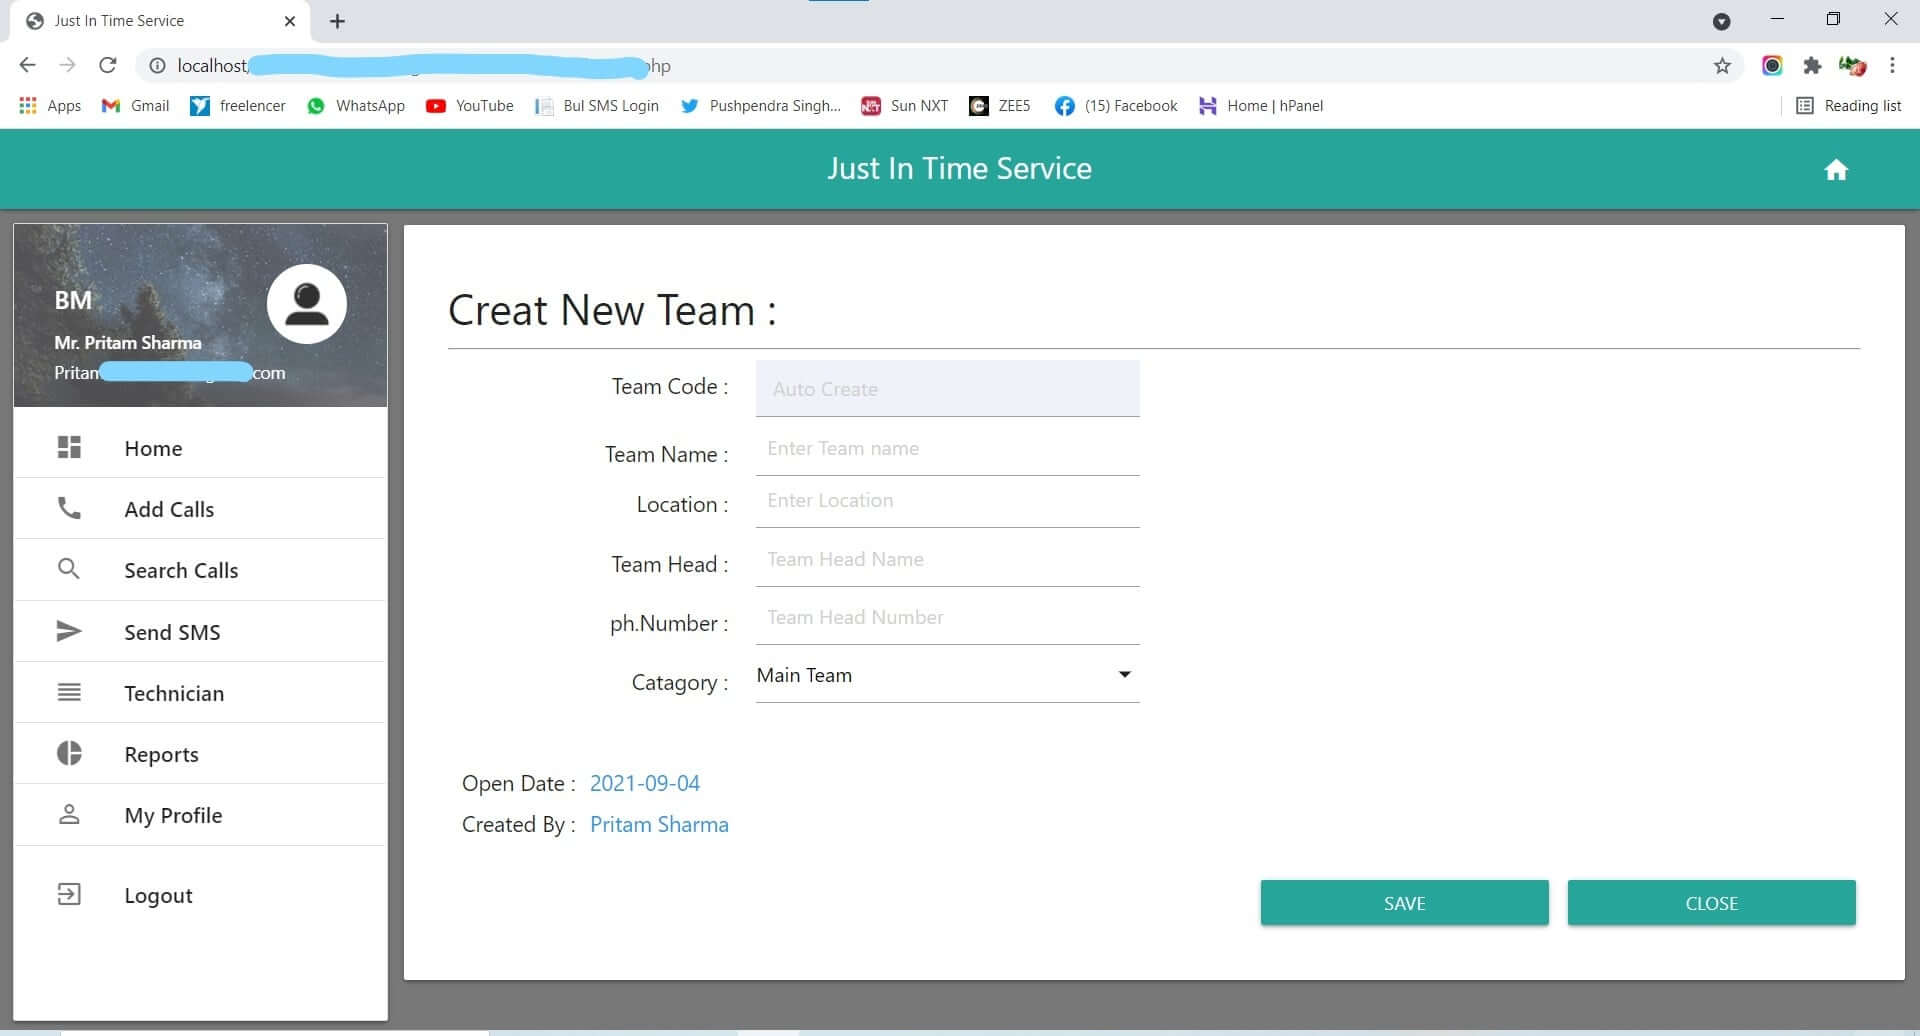 Online Service Call Management Professional CRM Software in PHP - Create New Team